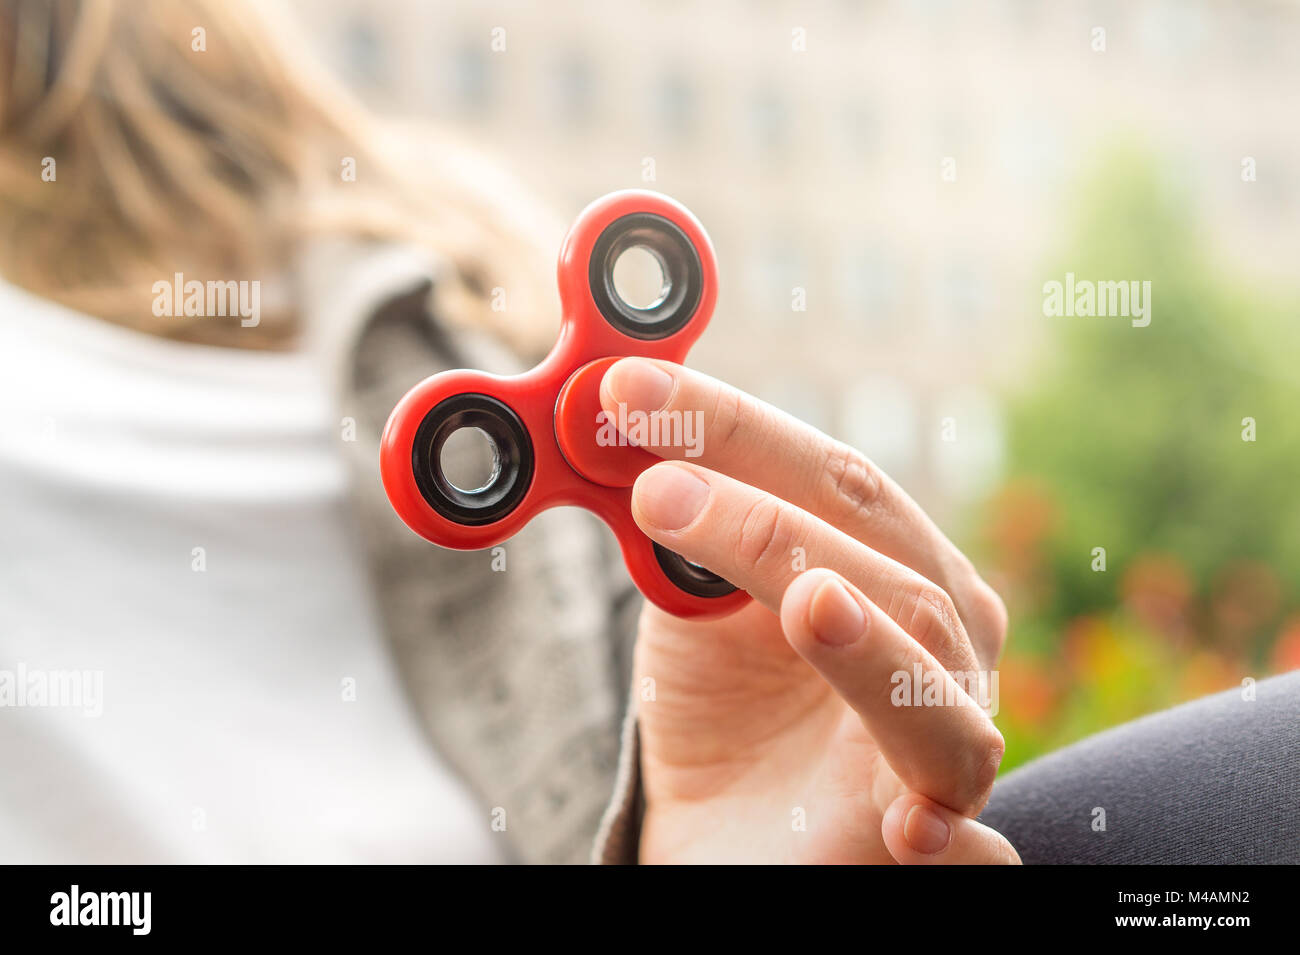 Woman or girl holding red fidget spinner in hand on a sunny summer day. Stock Photo